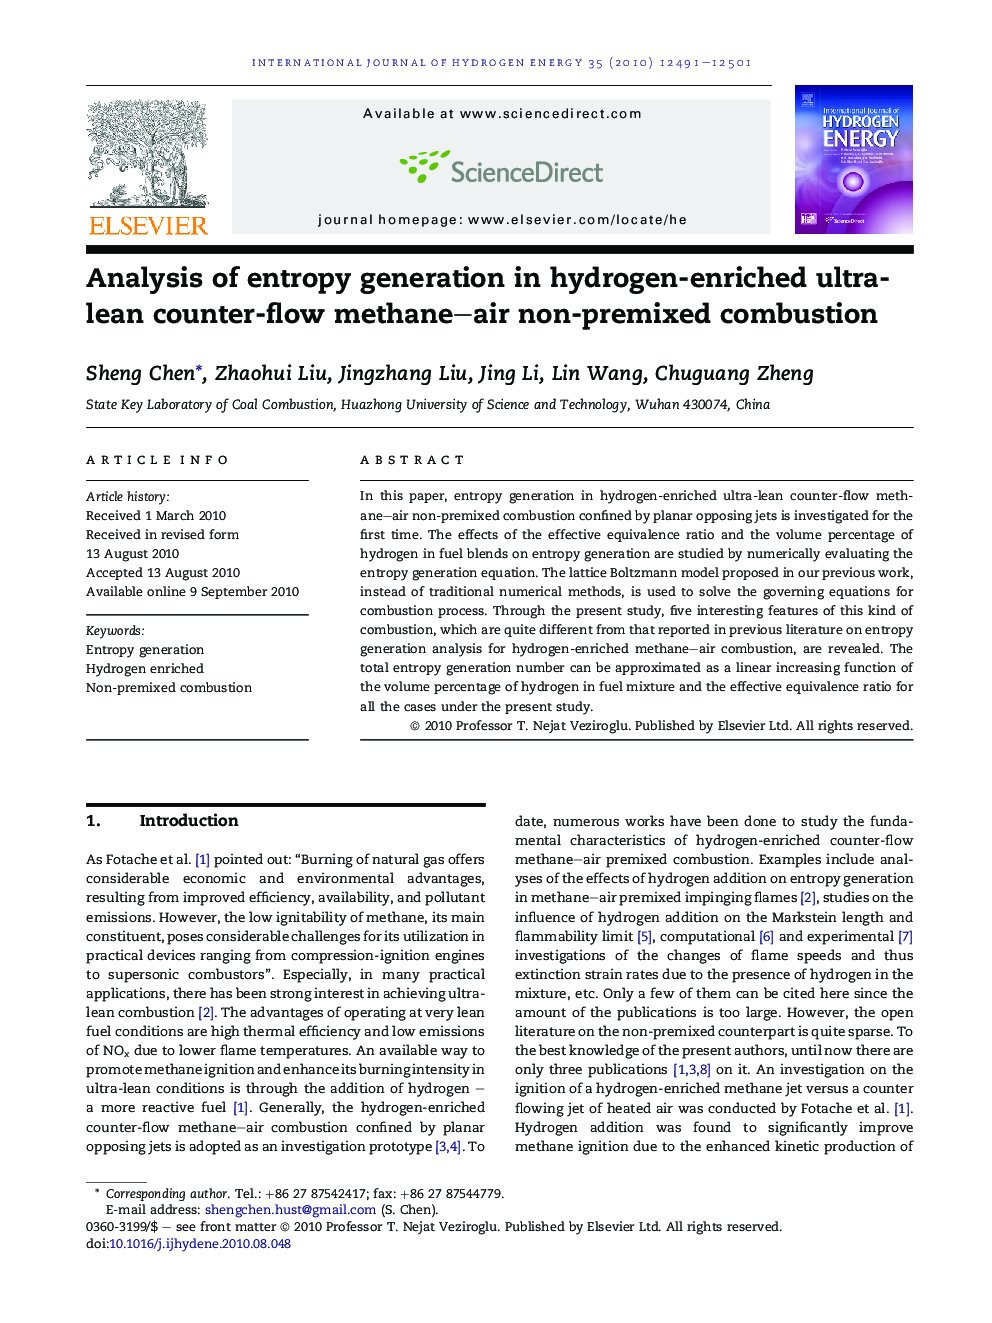 Analysis of entropy generation in hydrogen-enriched ultra-lean counter-flow methane–air non-premixed combustion